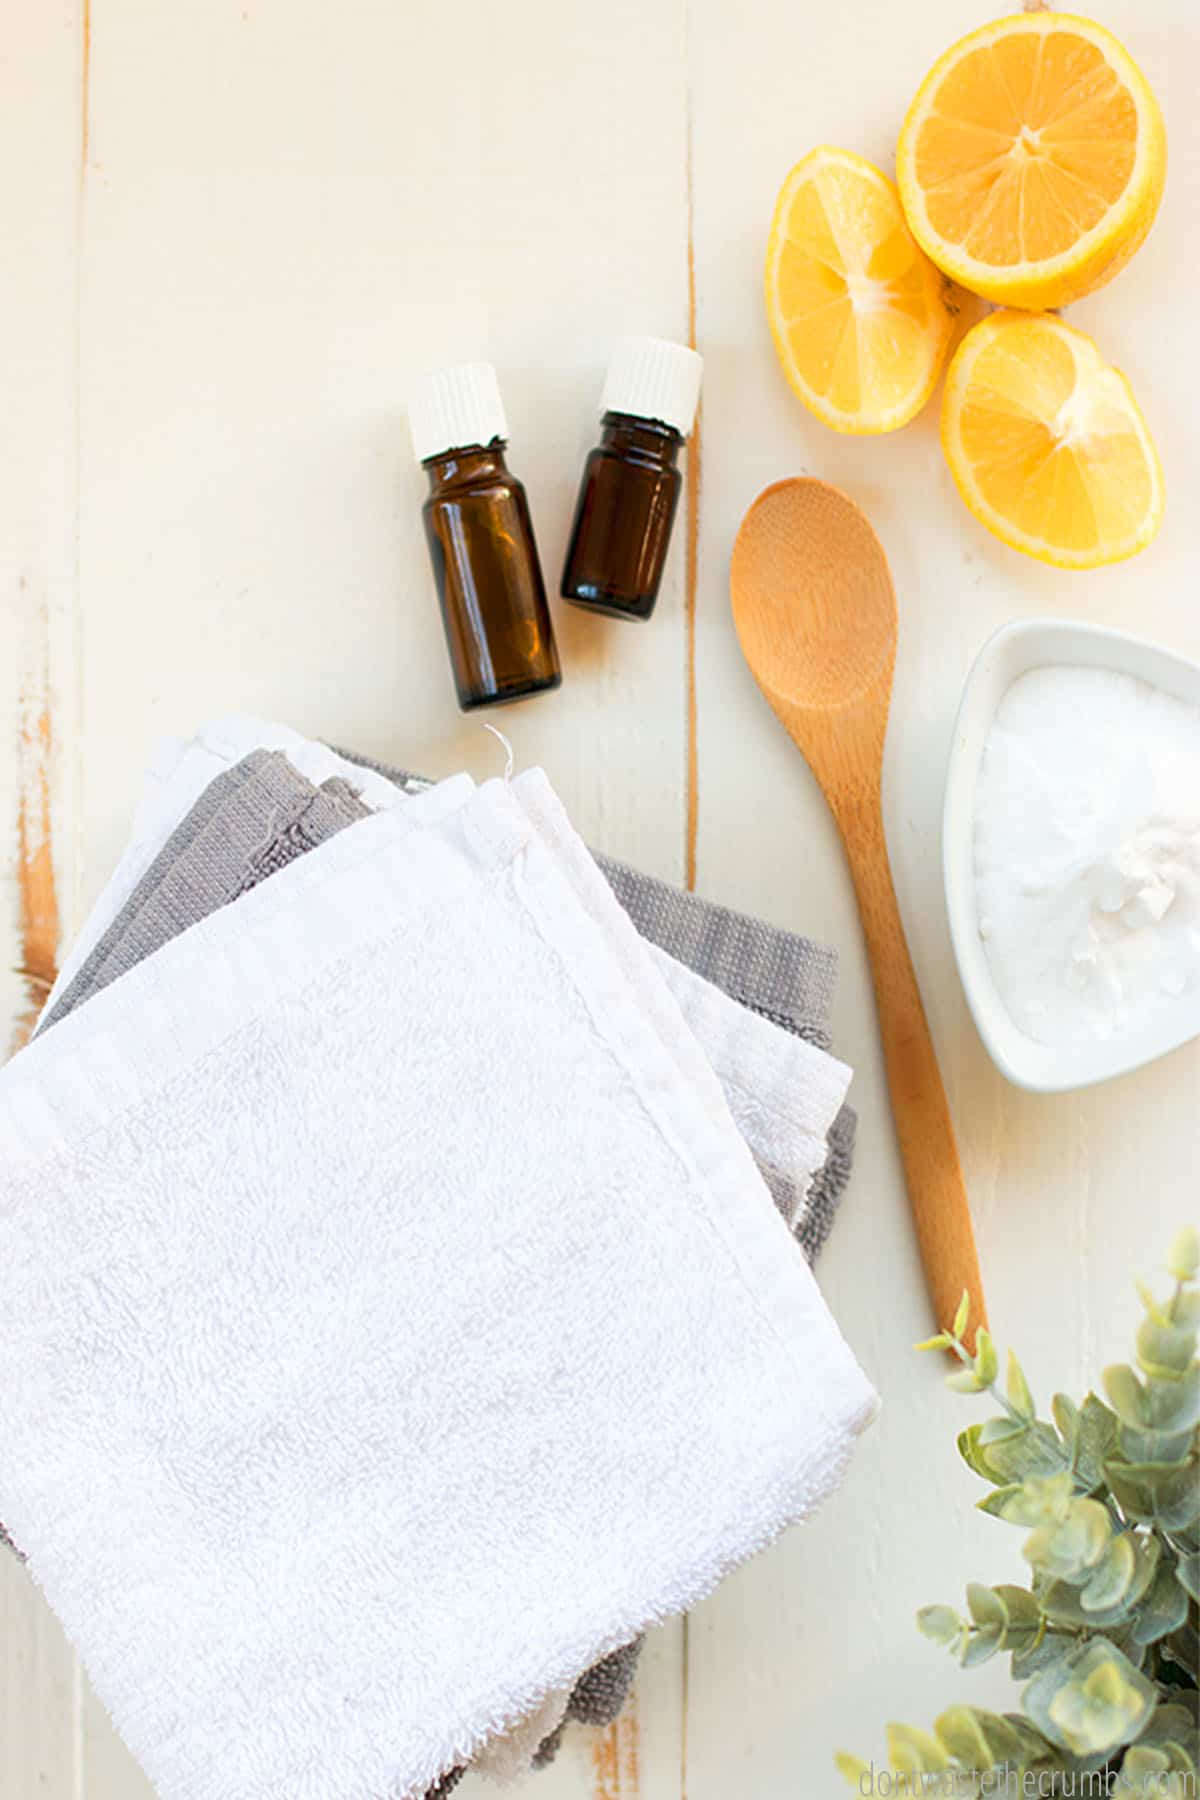 A pile of folded towels lie next to a bowl of baking soda, two bottles of essential oils, and lemon.